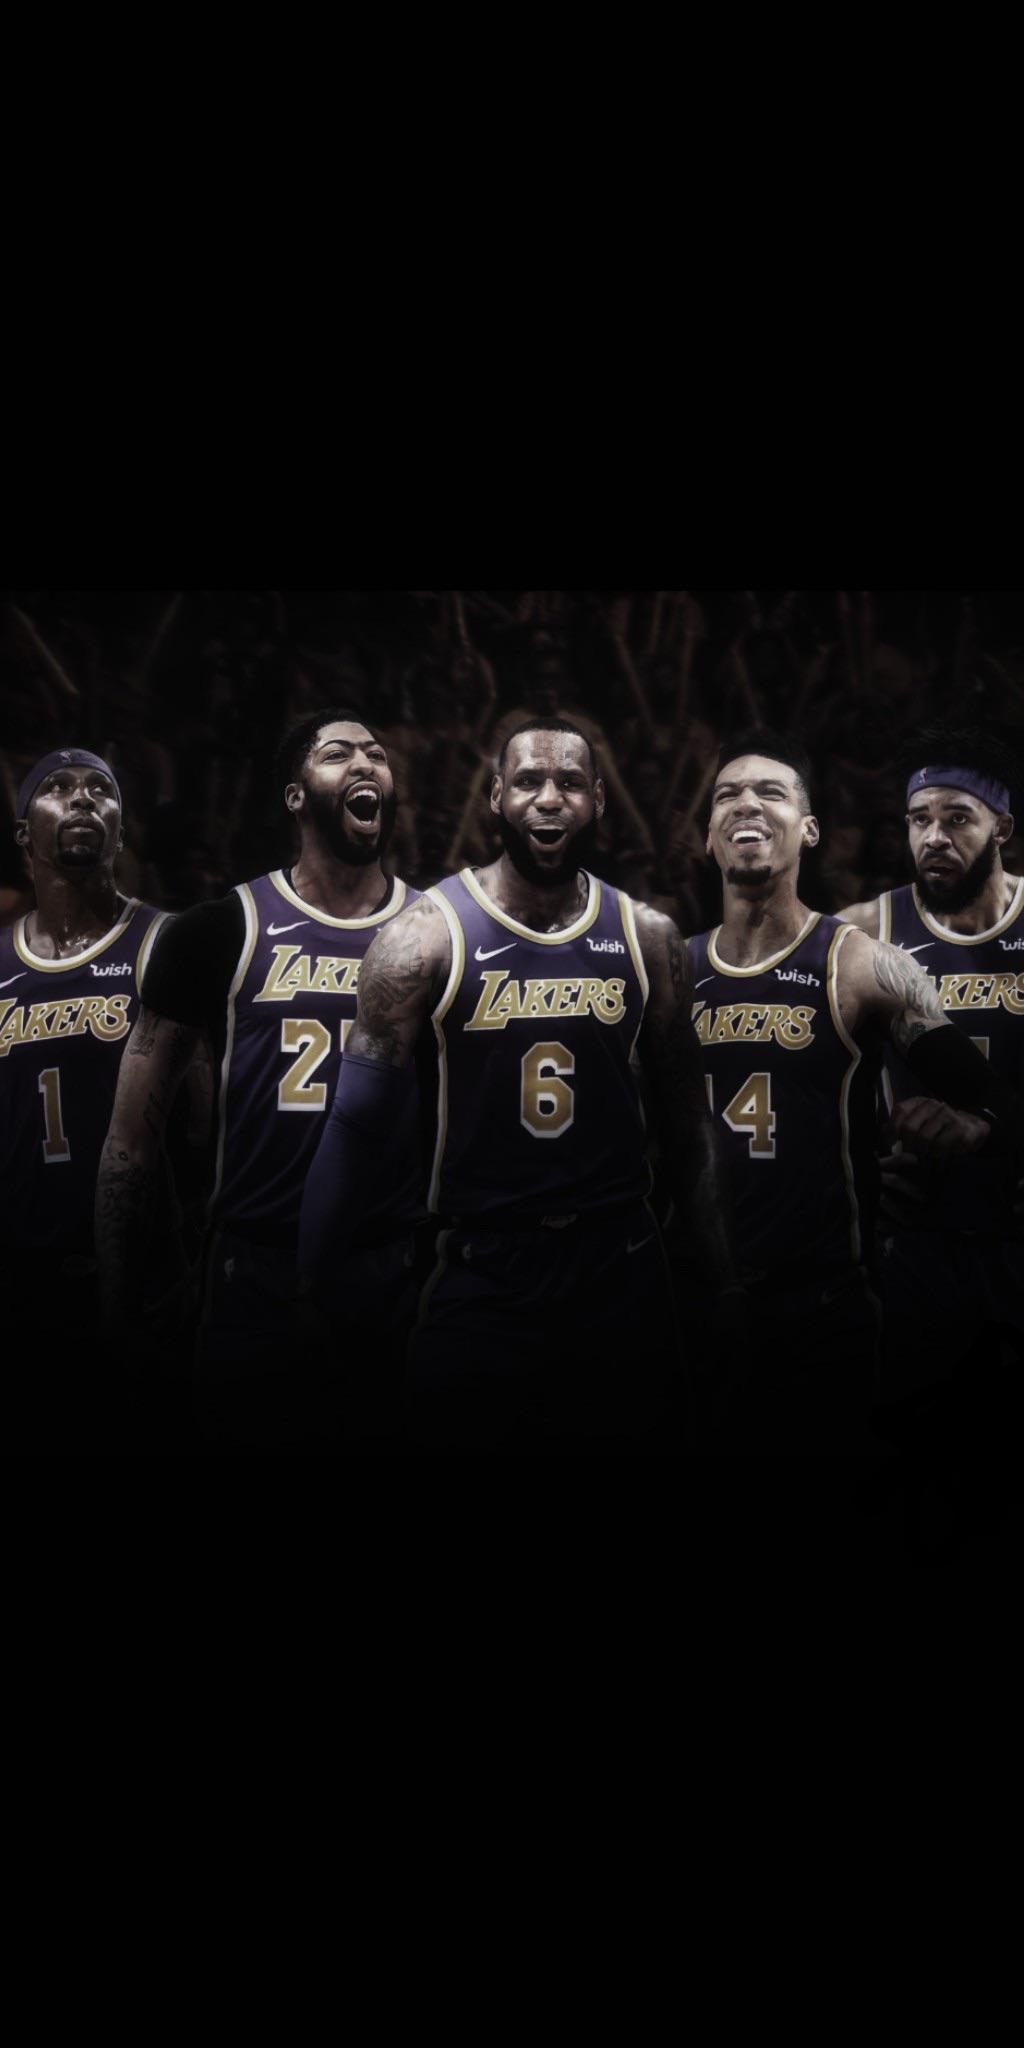 Lakers 24 Wallpapers - Top Free Lakers 24 Backgrounds ...